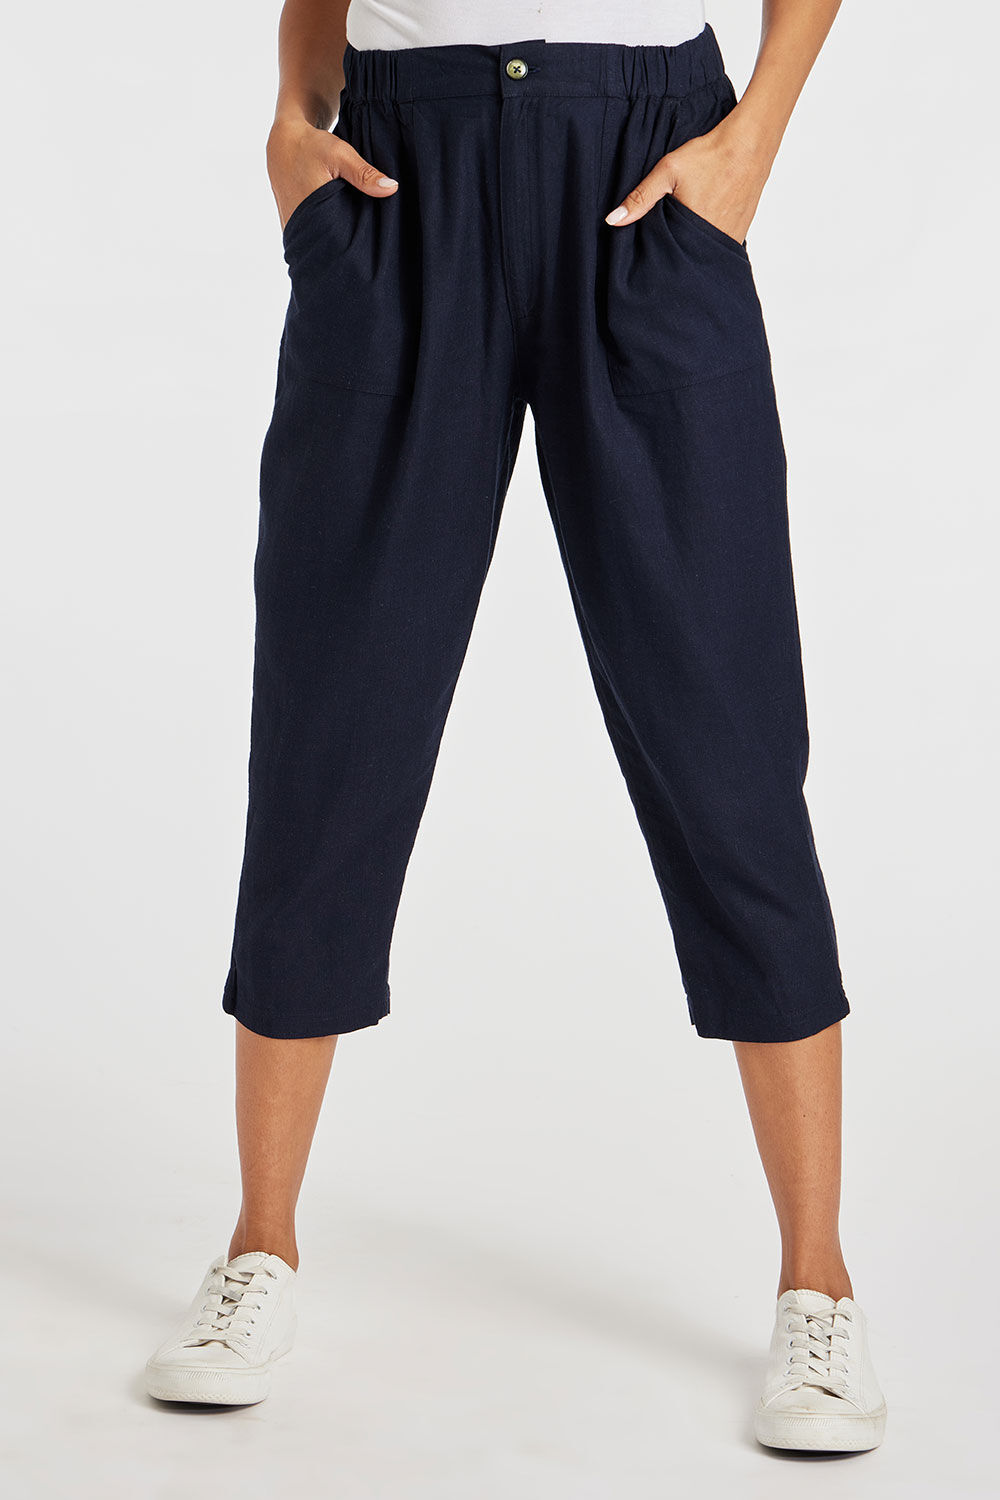 Bonmarche Navy Tapered Cropped Linen Trousers With Button Detail, Size: 22